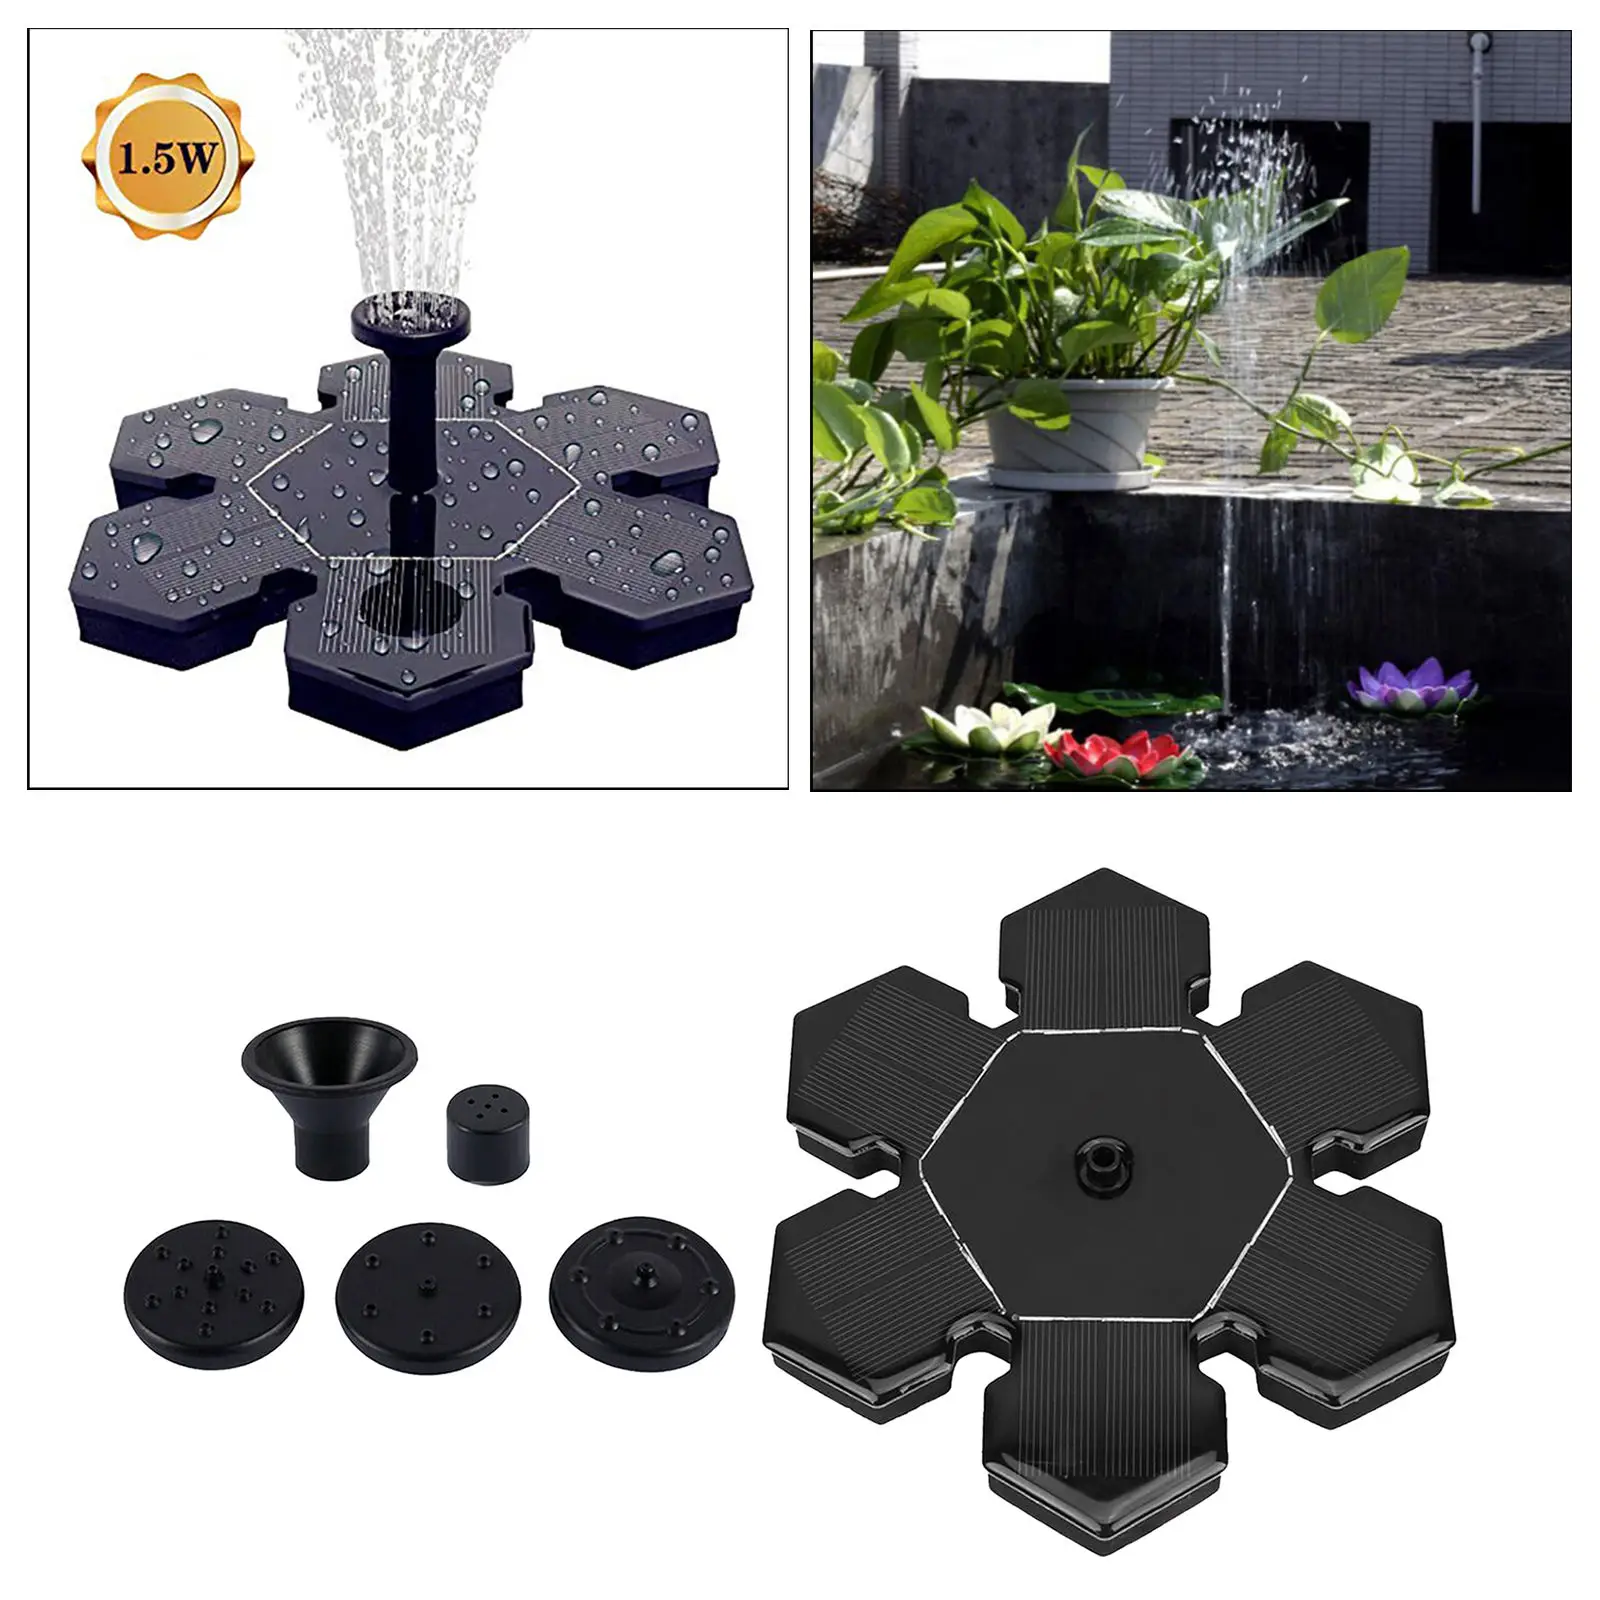 Solar Garden Water Fountain Pond Pool Pump Small Pond Water Circulation For Garden, Patio & Lawn Fish Tank